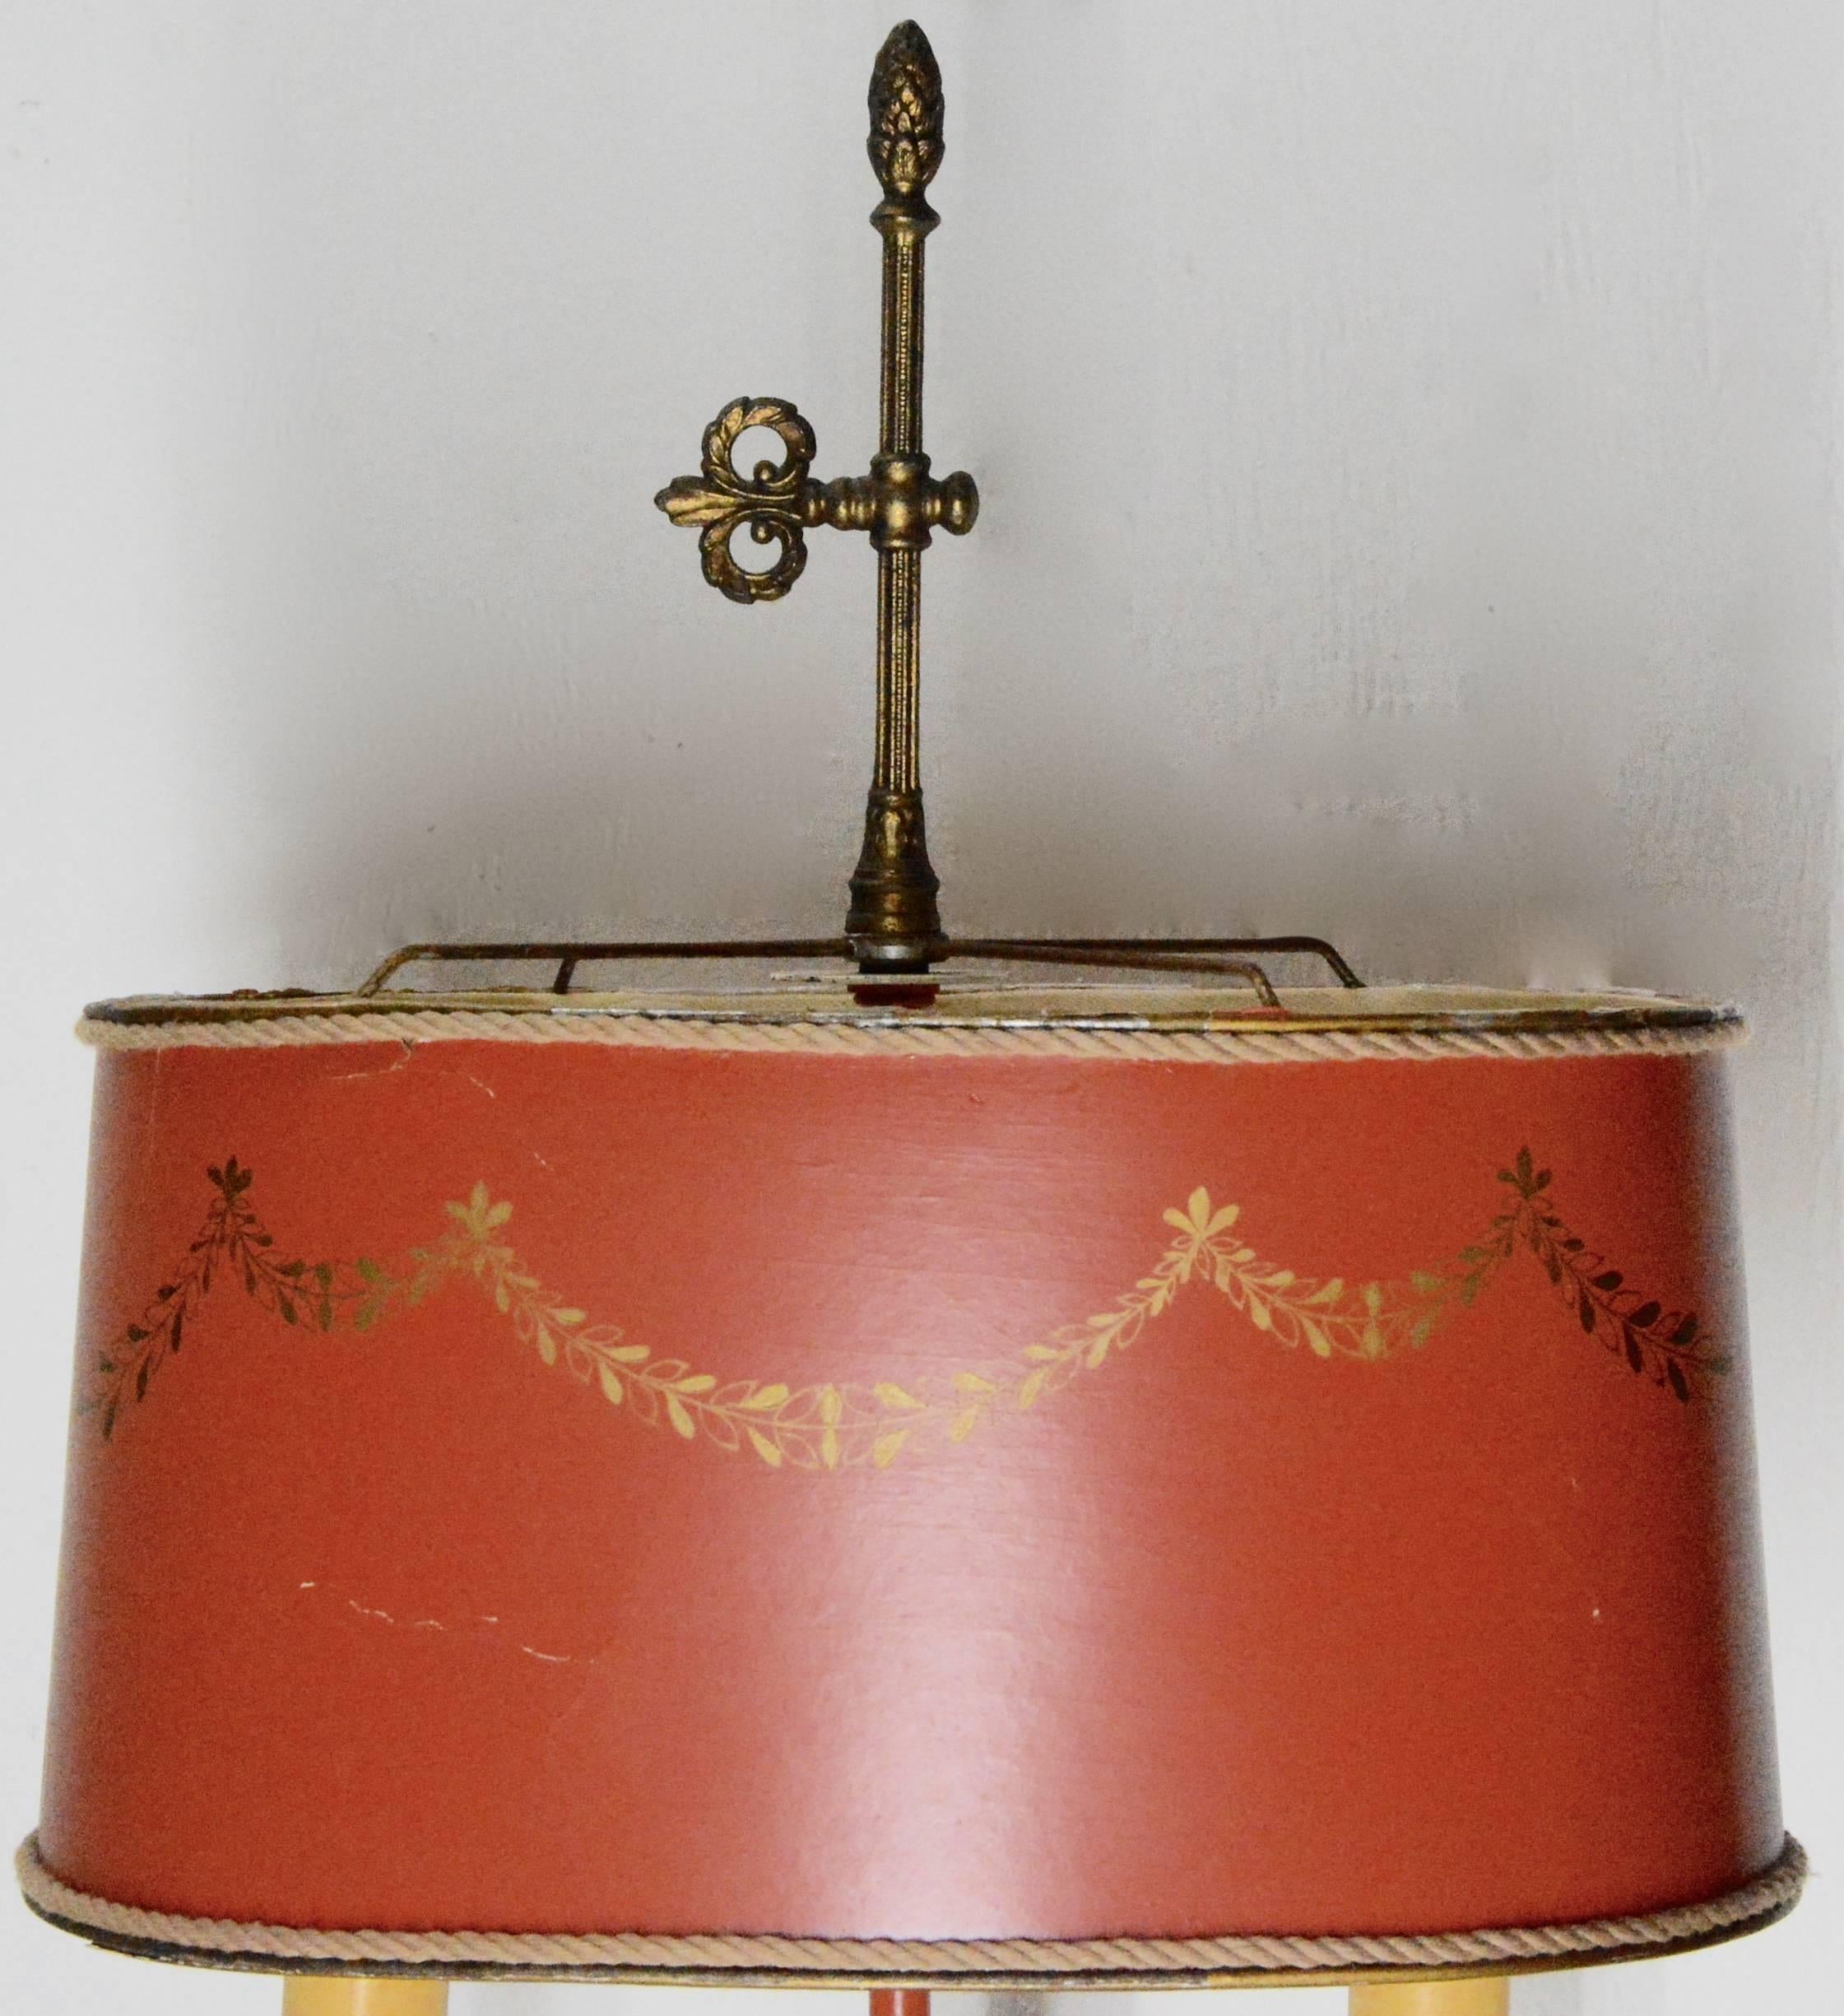 This is a lovely tole lamp that will enhance the decor of your home. It is finished in an orange tone with gold highlights. Two standard sockets will give you ample lighting. The shade is made of a heavy paper that is finished off with a rope trim.